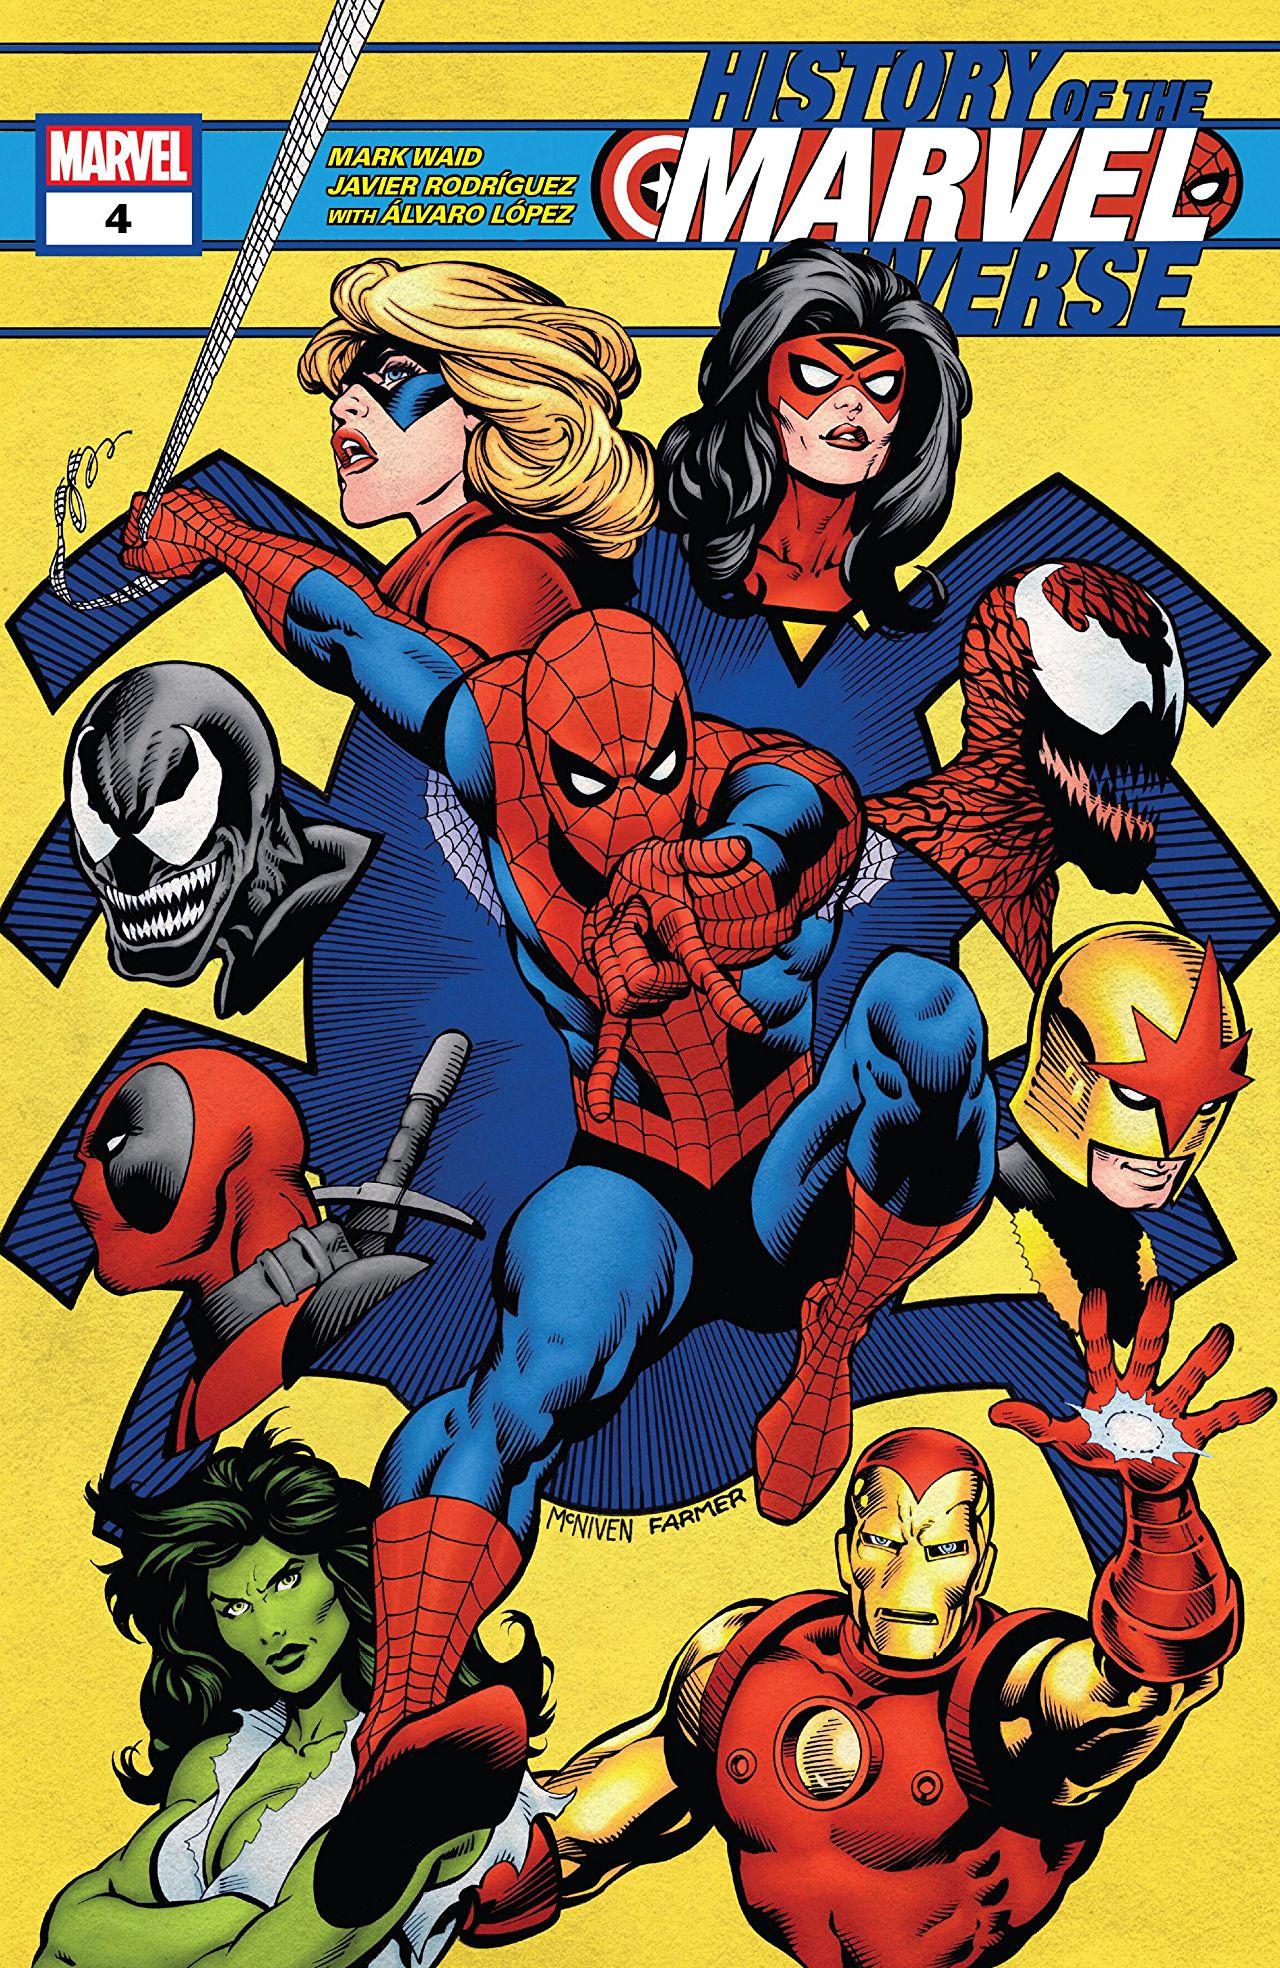 History of the Marvel Universe Vol. 2 #4